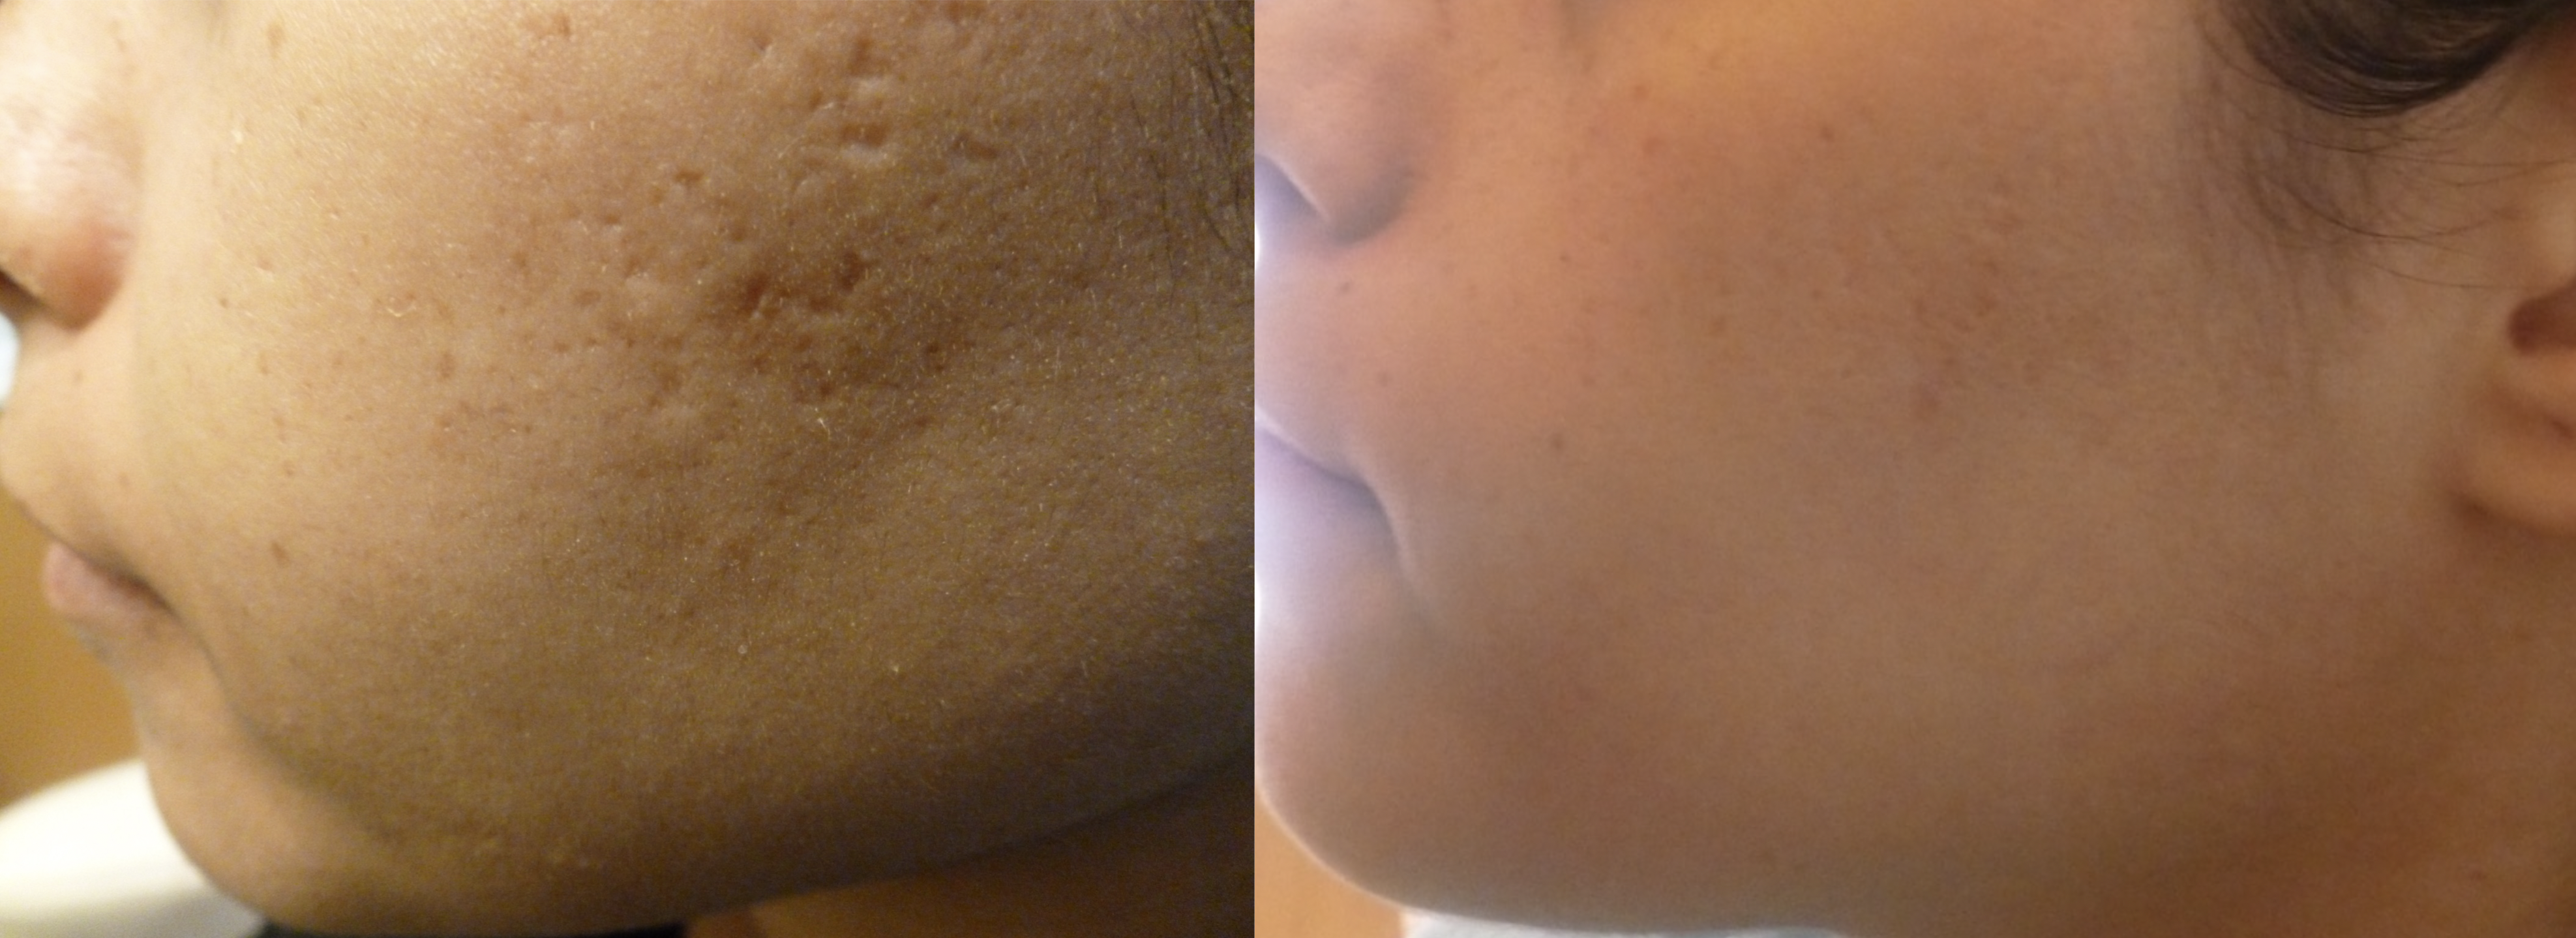 BEFORE FRAXEL – ACNE SCARRING (LEFT), 1 MONTH POST AFTER FRAXEL #4 (RIGHT)